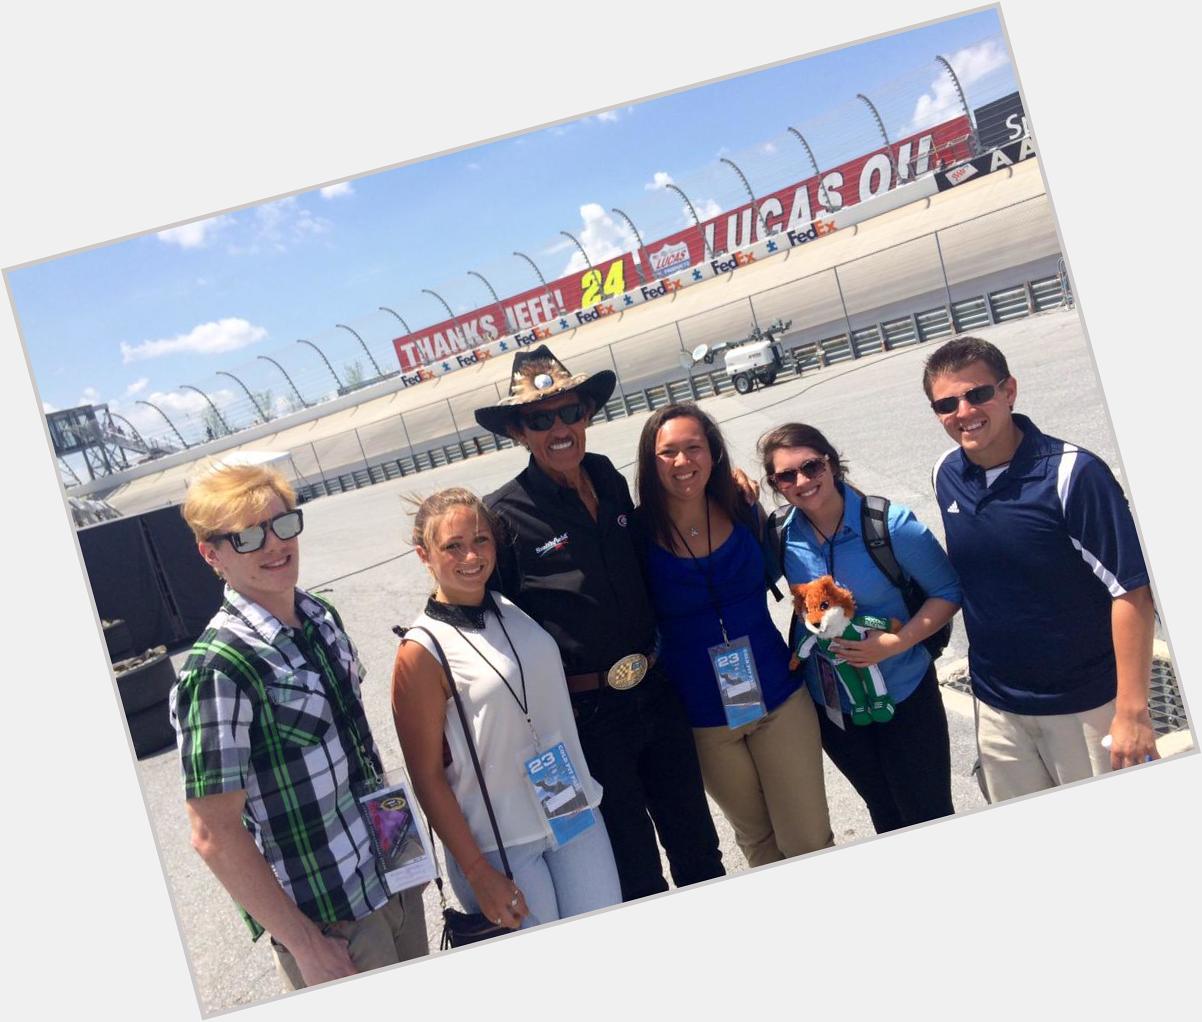 Happy Birthday to Richard Petty! Also, to when our interns (and Tricky) met The King himself at 